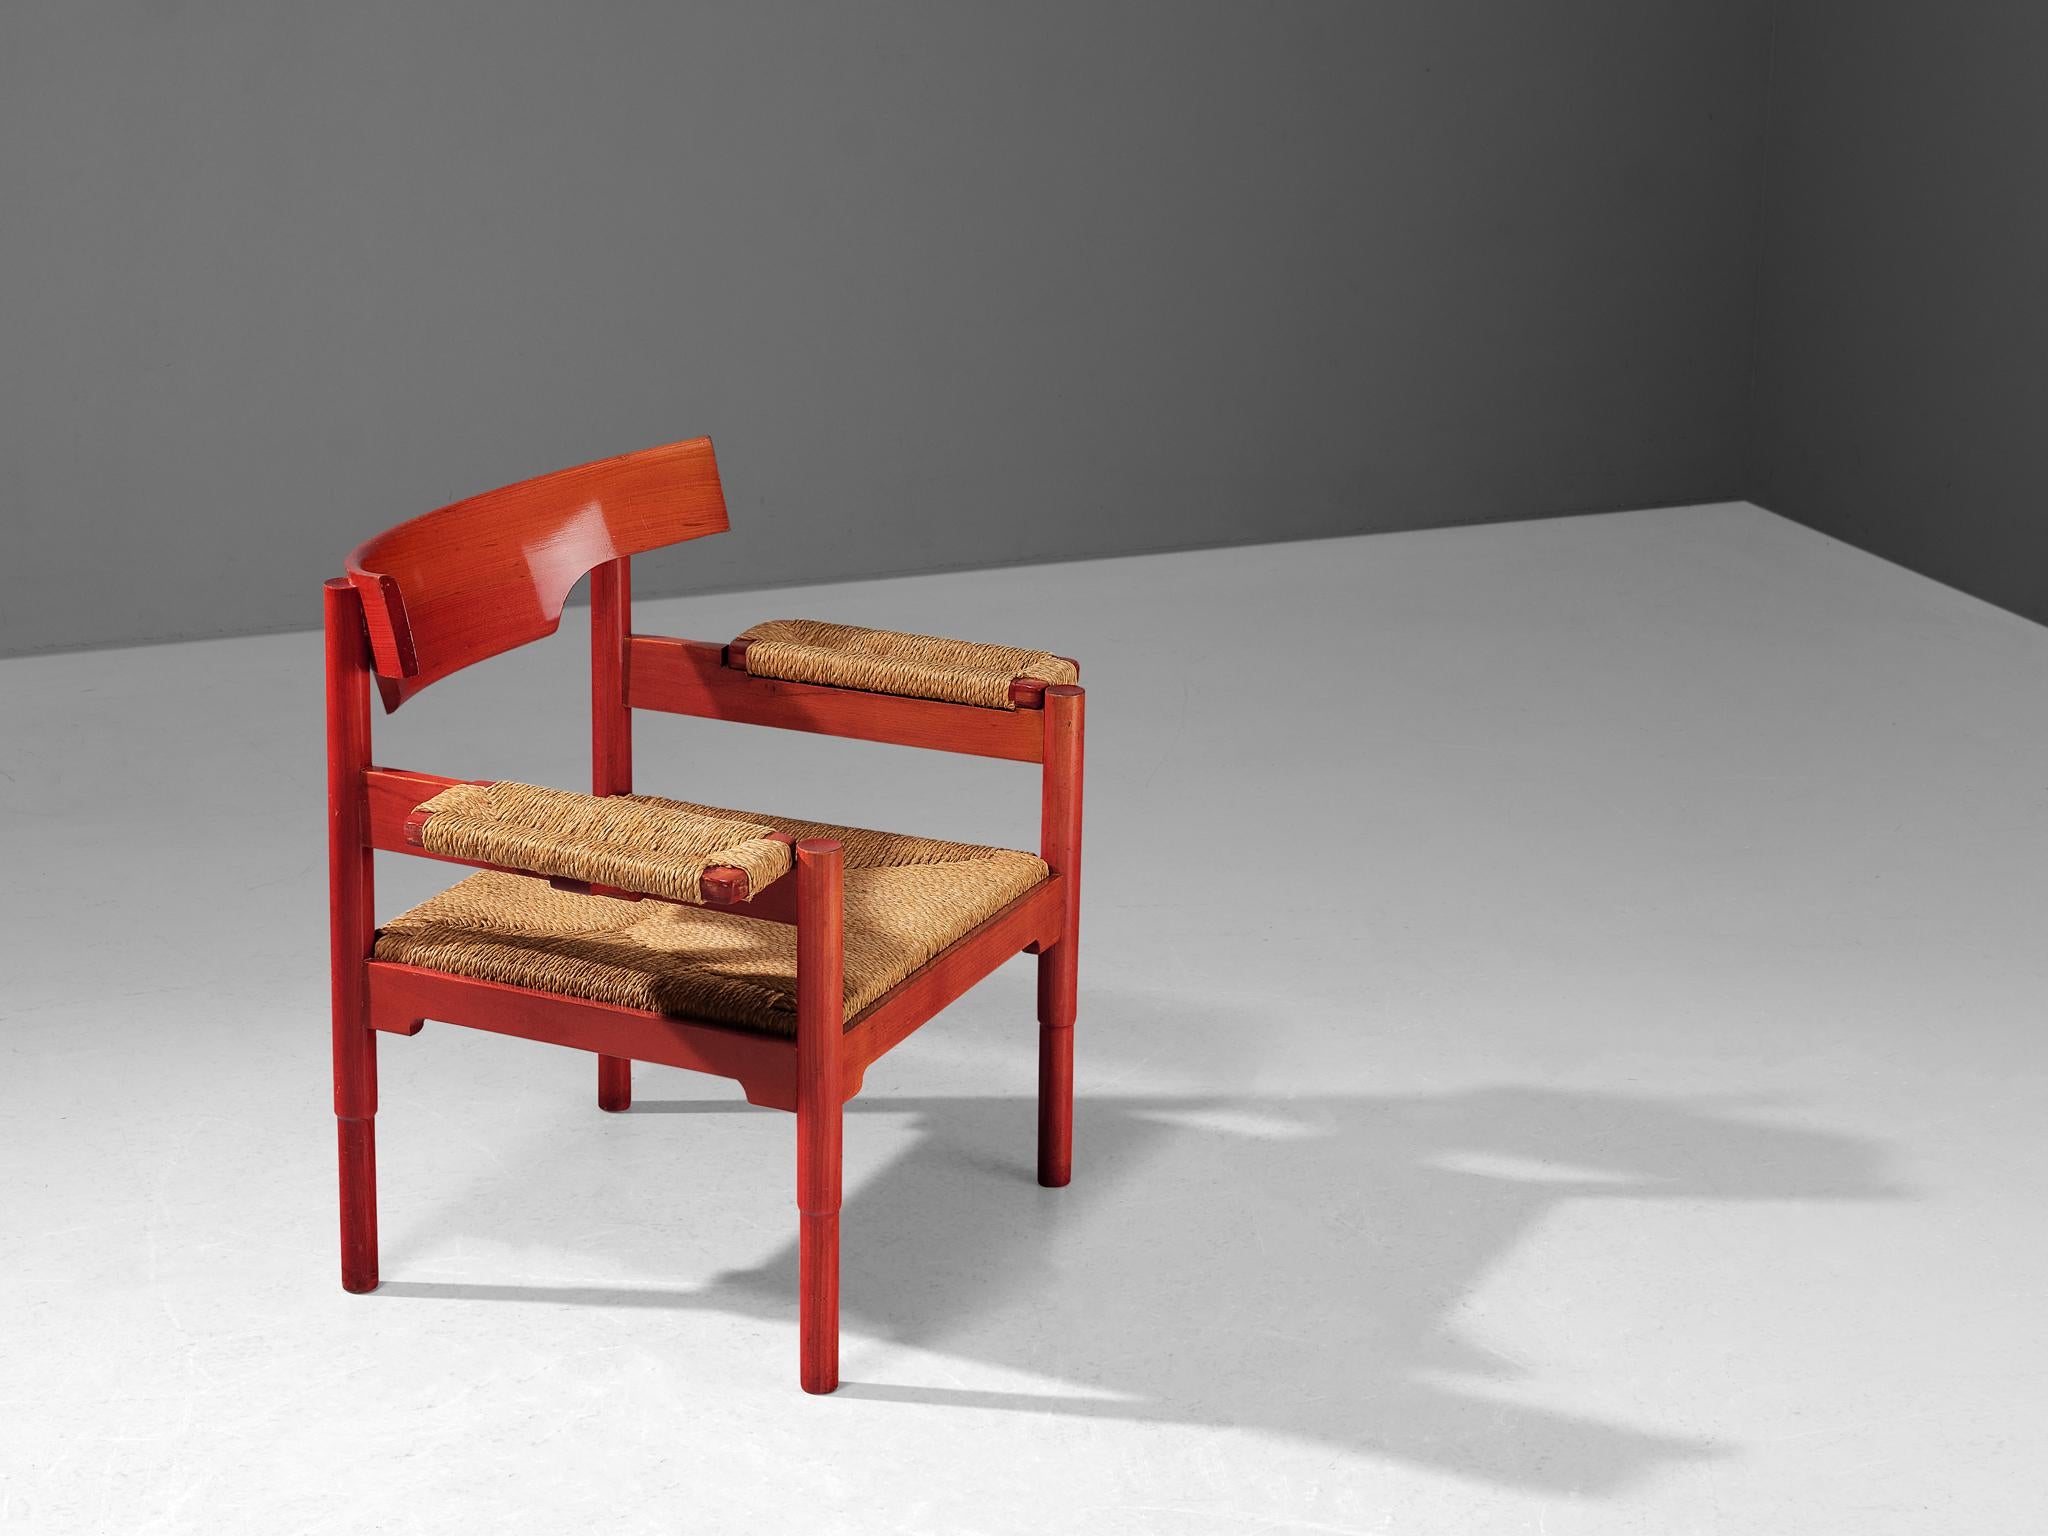 Vico Magistretti for Cassina, ‘Carimate’ armchair, stained beech, straw, Italy, designed circa 1960

This rare armchair belongs to the 'Carimate' line, one of Vico Magistretti’s most well-known furniture series. These chairs have been originally